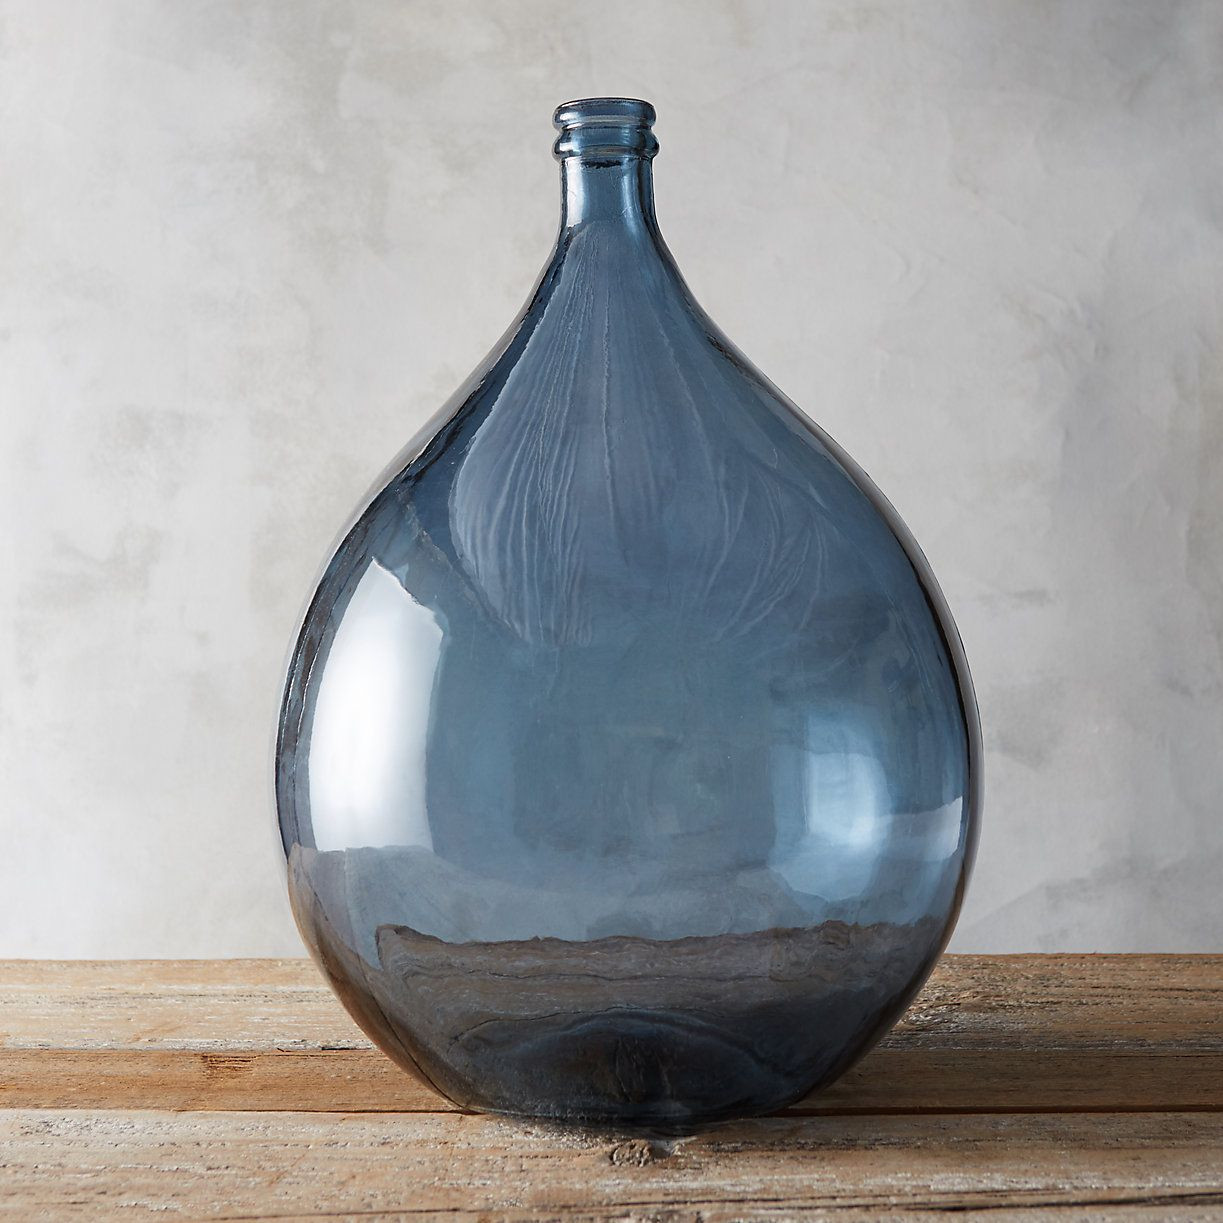 recycled glass vase of recycled glass demijohn vase house home pinterest interiors within recycled glass demijohn vase